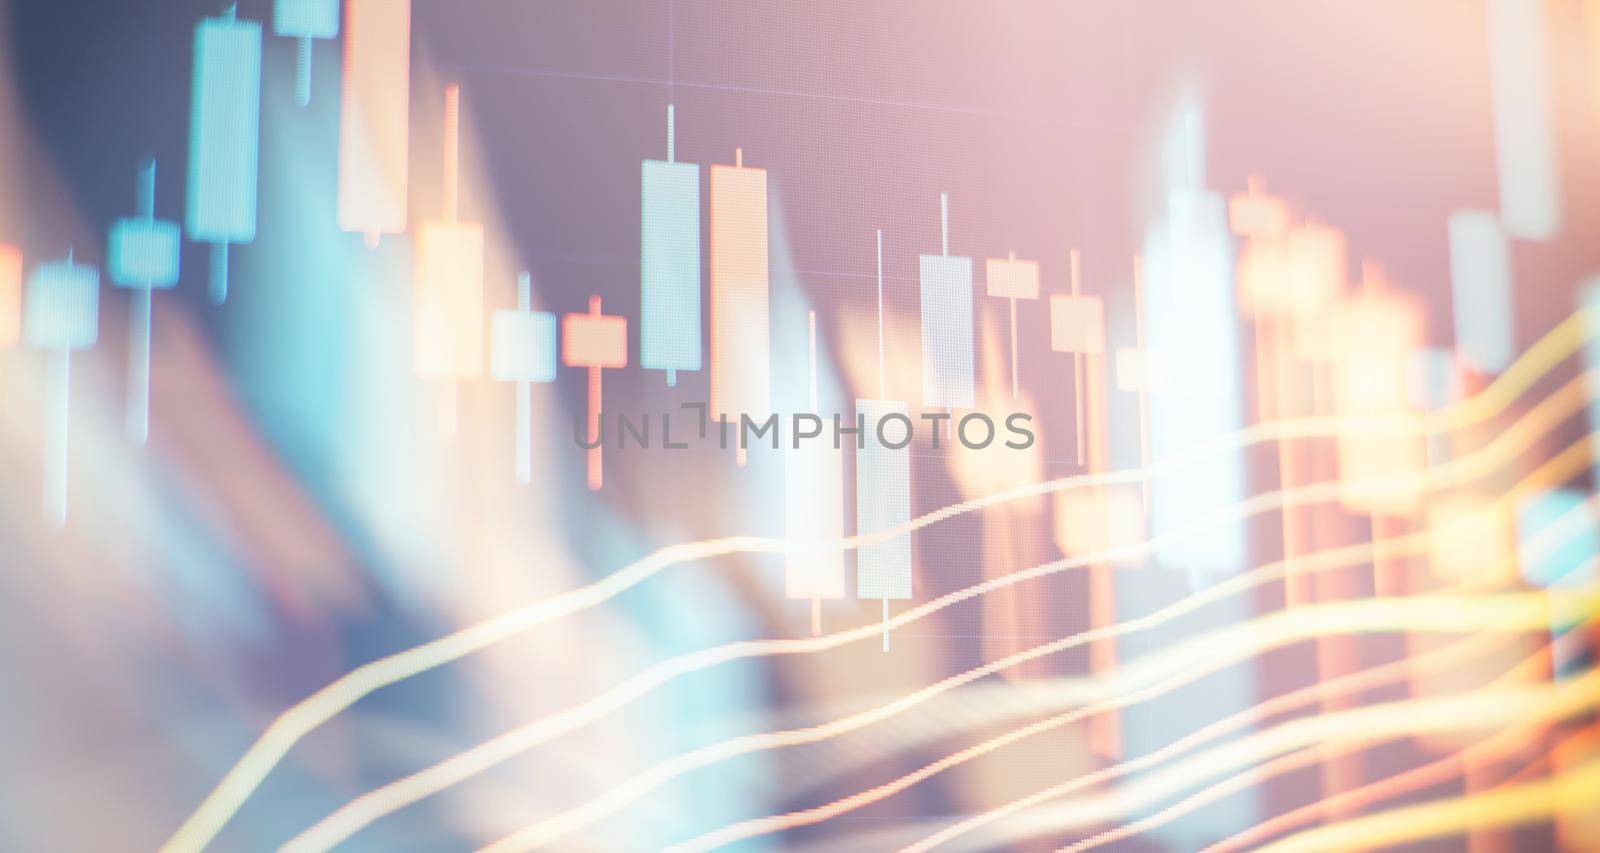 Abstract finance background. Stock market graph on led screen. Finance and investment concept. by Maximusnd